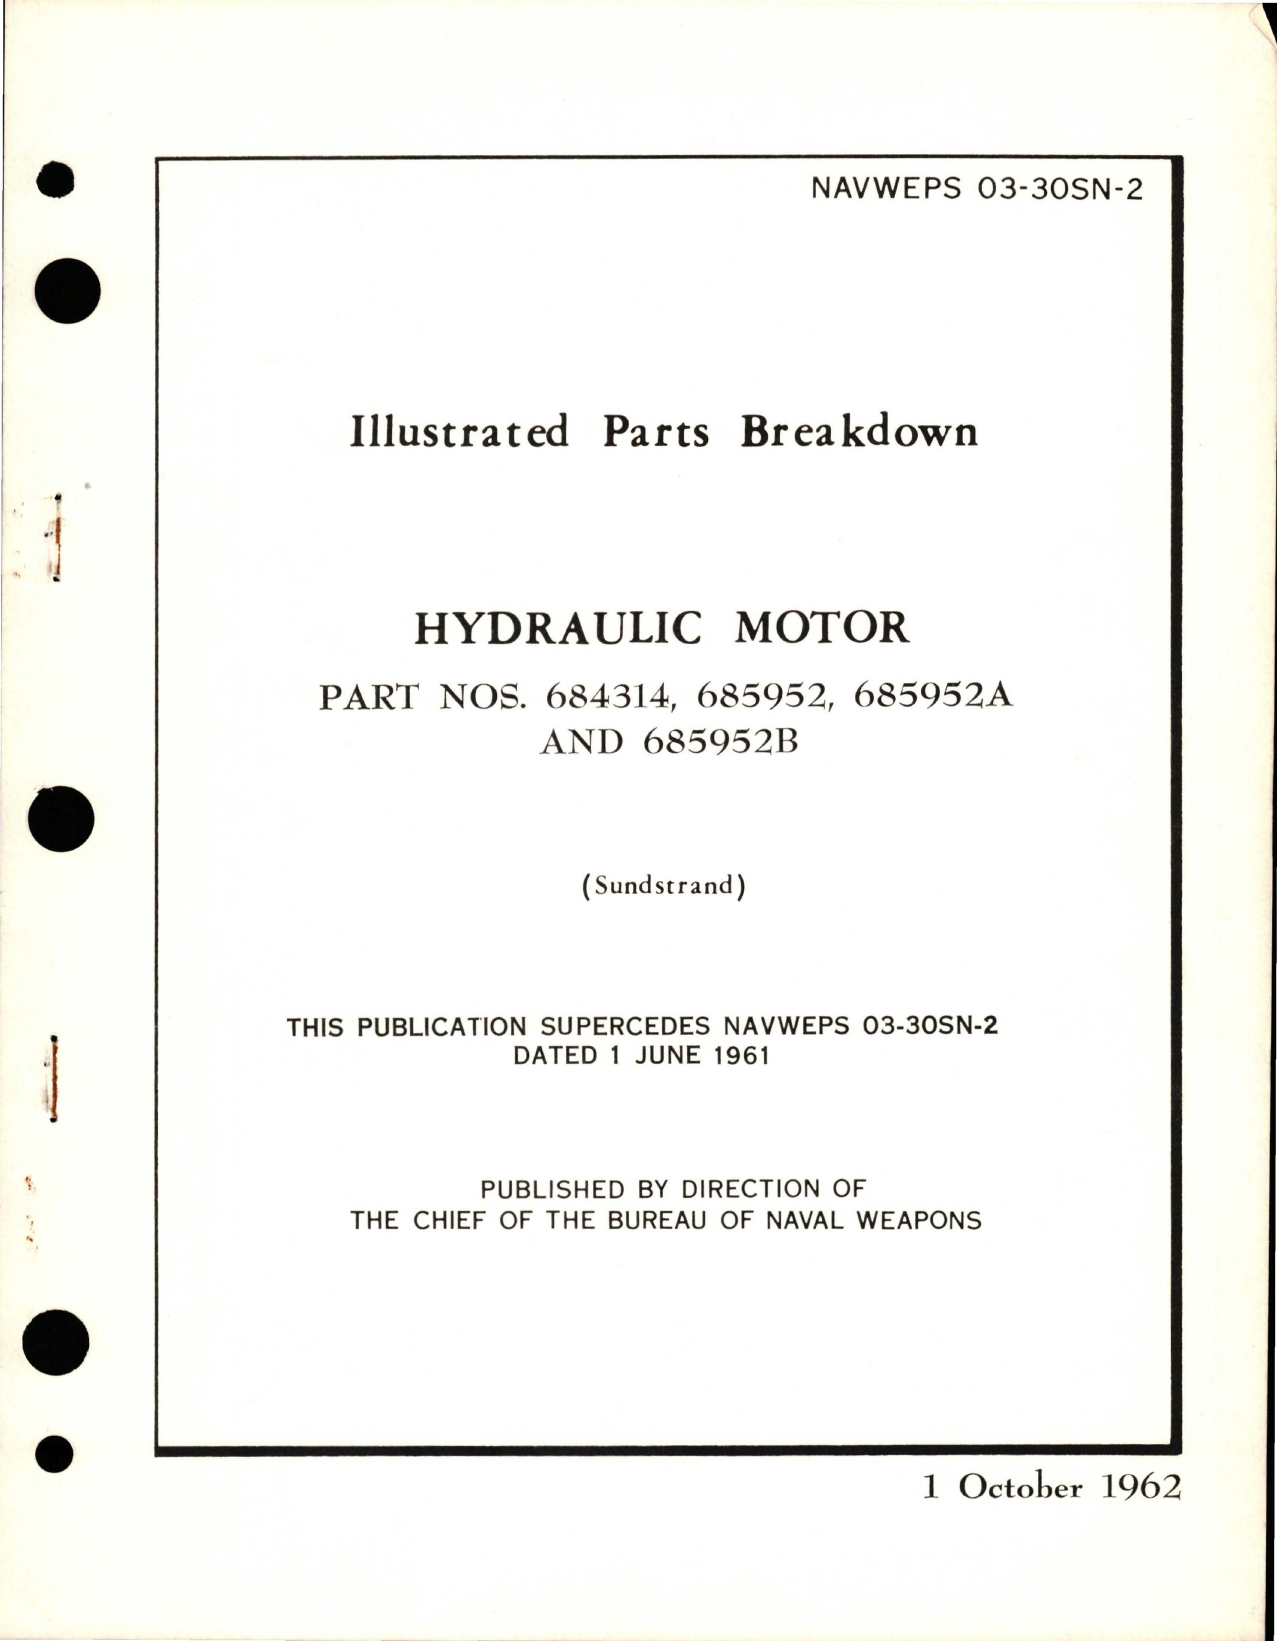 Sample page 1 from AirCorps Library document: Illustrated Parts Breakdown for Hydraulic Motor - Parts 684314, 685952, 685952A, and 685952B